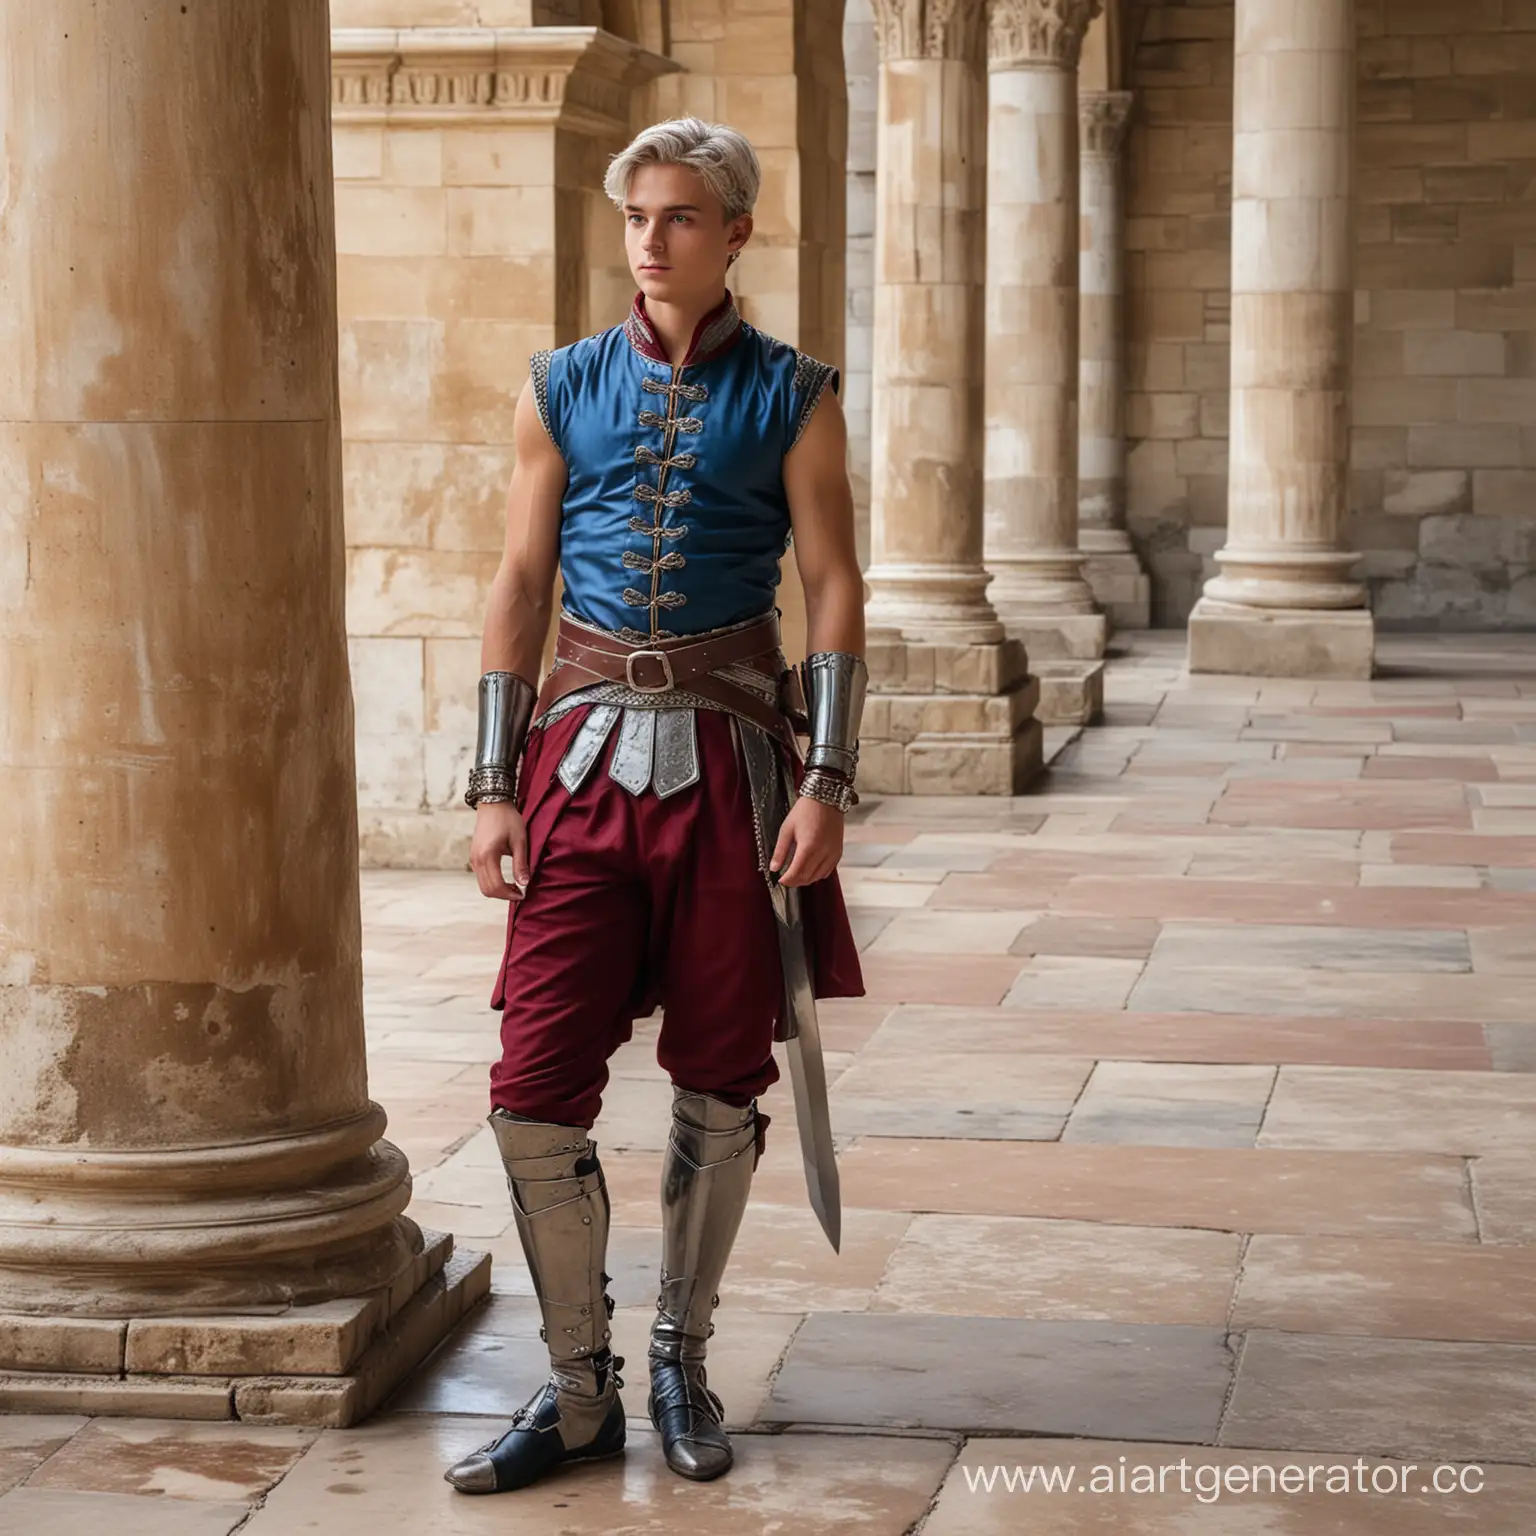 BronzeSkinned-Youth-in-Silver-Attire-Standing-on-Ancient-Palace-Terrace